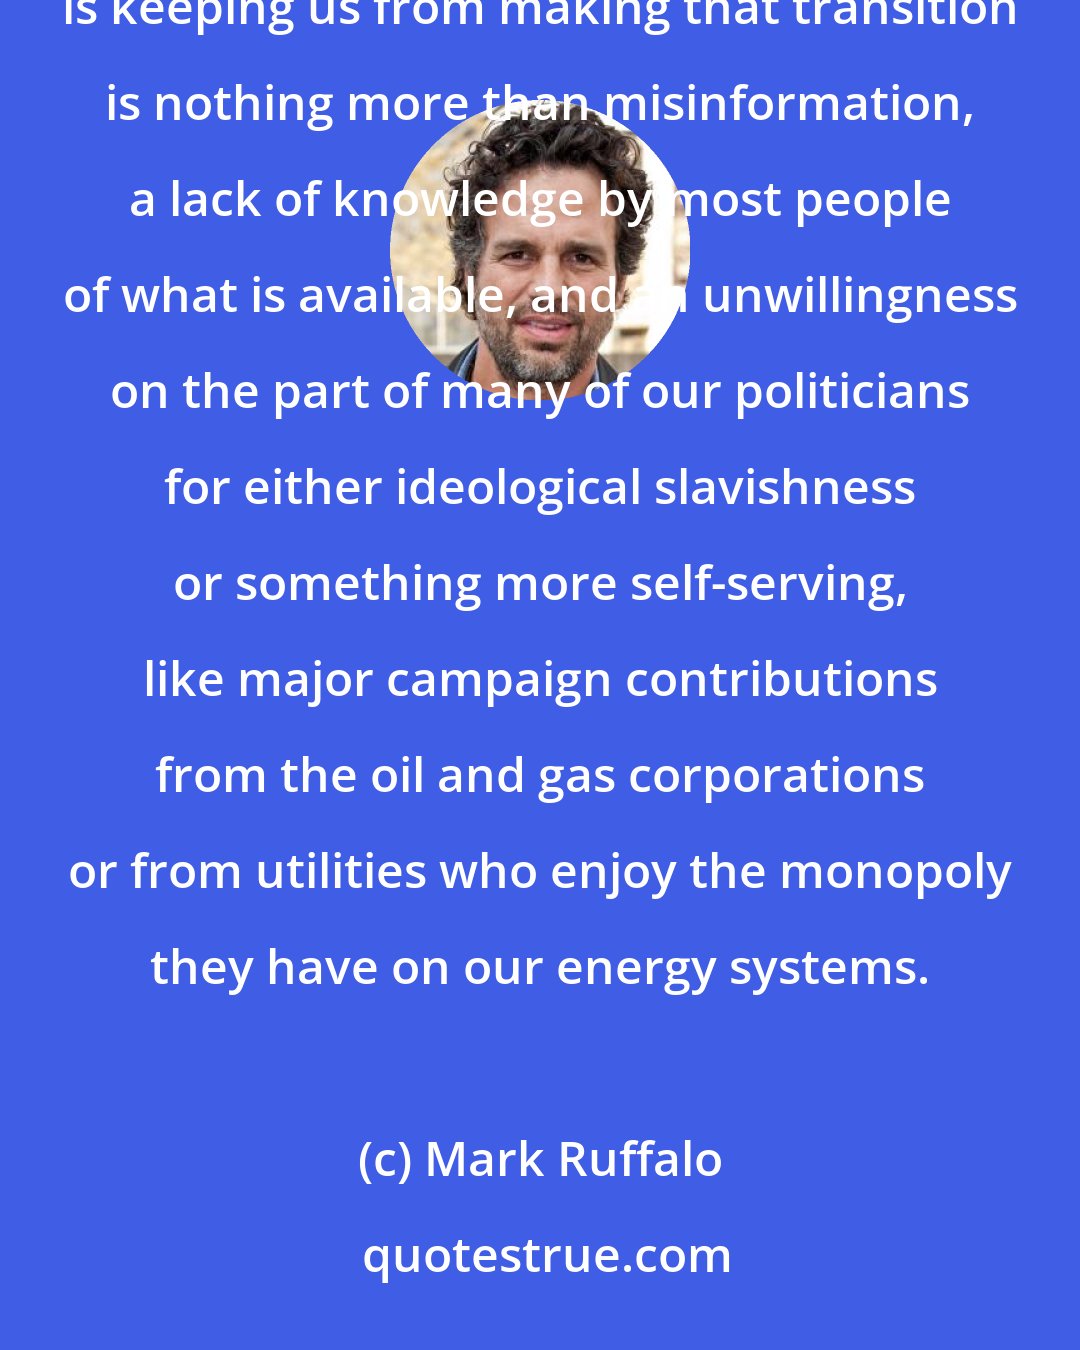 Mark Ruffalo: The technology is available to us today to begin the transition to 100 percent renewable energy. What is keeping us from making that transition is nothing more than misinformation, a lack of knowledge by most people of what is available, and an unwillingness on the part of many of our politicians for either ideological slavishness or something more self-serving, like major campaign contributions from the oil and gas corporations or from utilities who enjoy the monopoly they have on our energy systems.